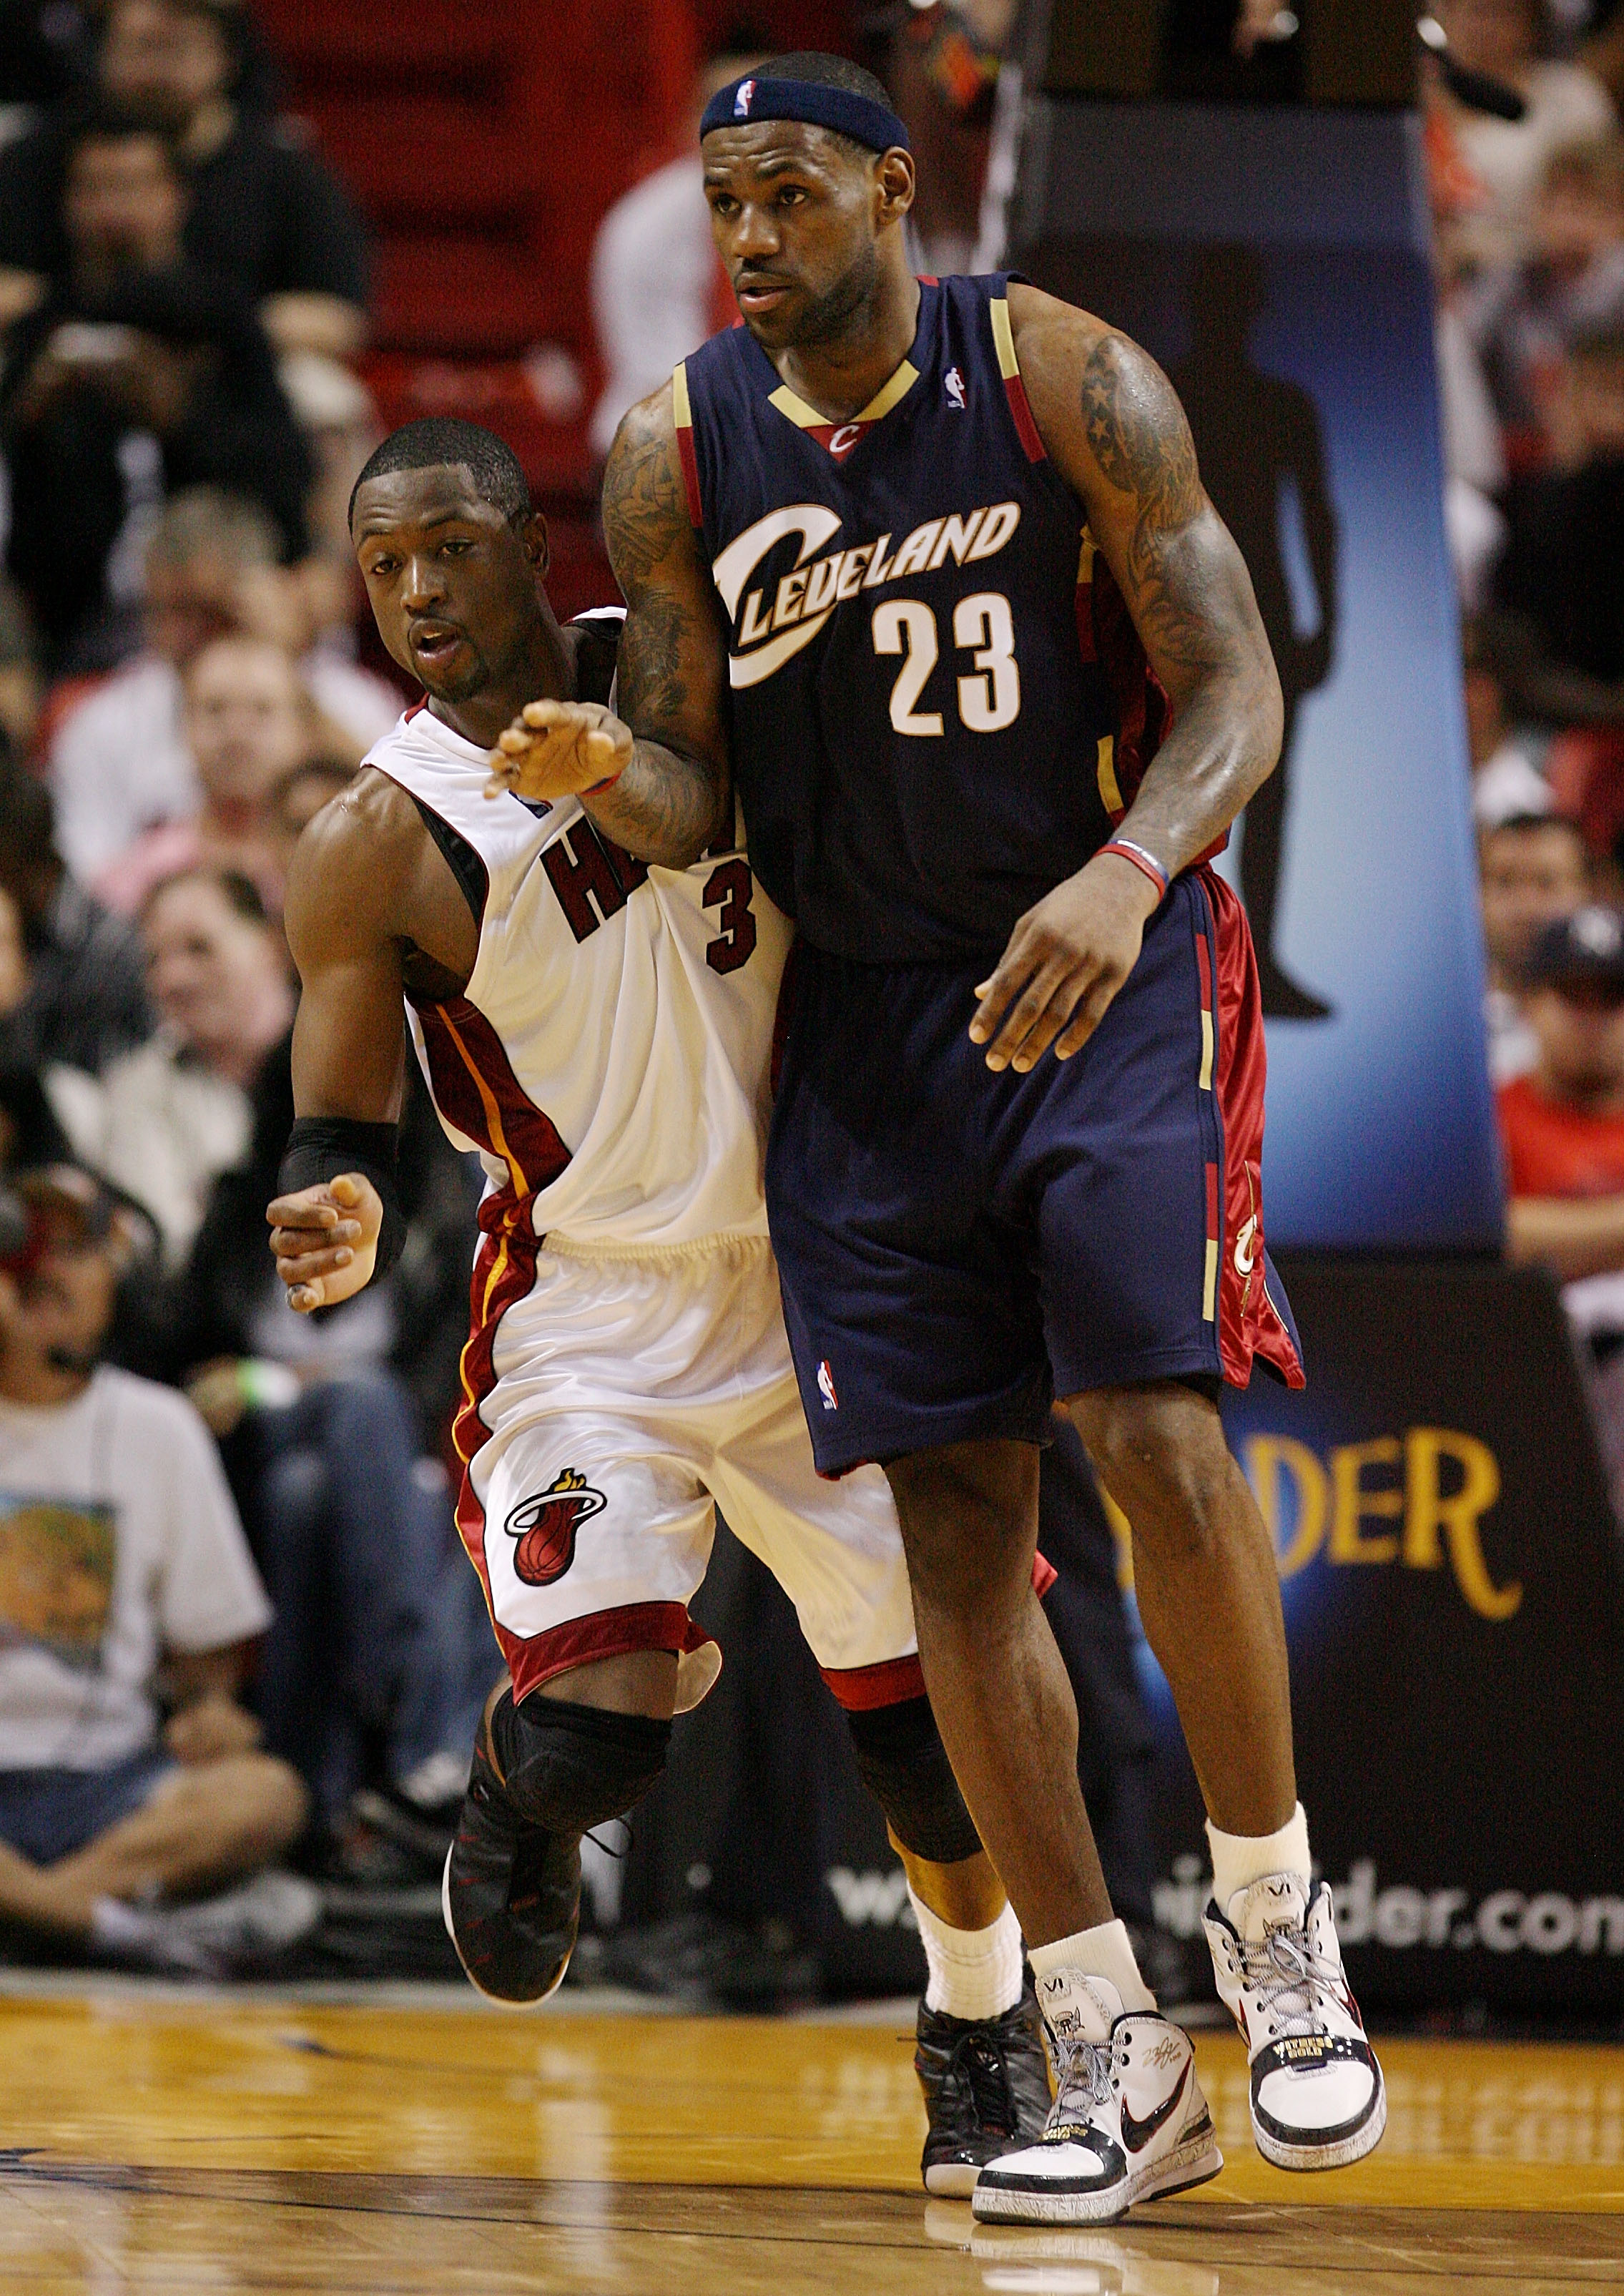 Miami Heat's Dwyane Wade, left, who scored 23 points, is guarded by New  Jersey Nets' Vince